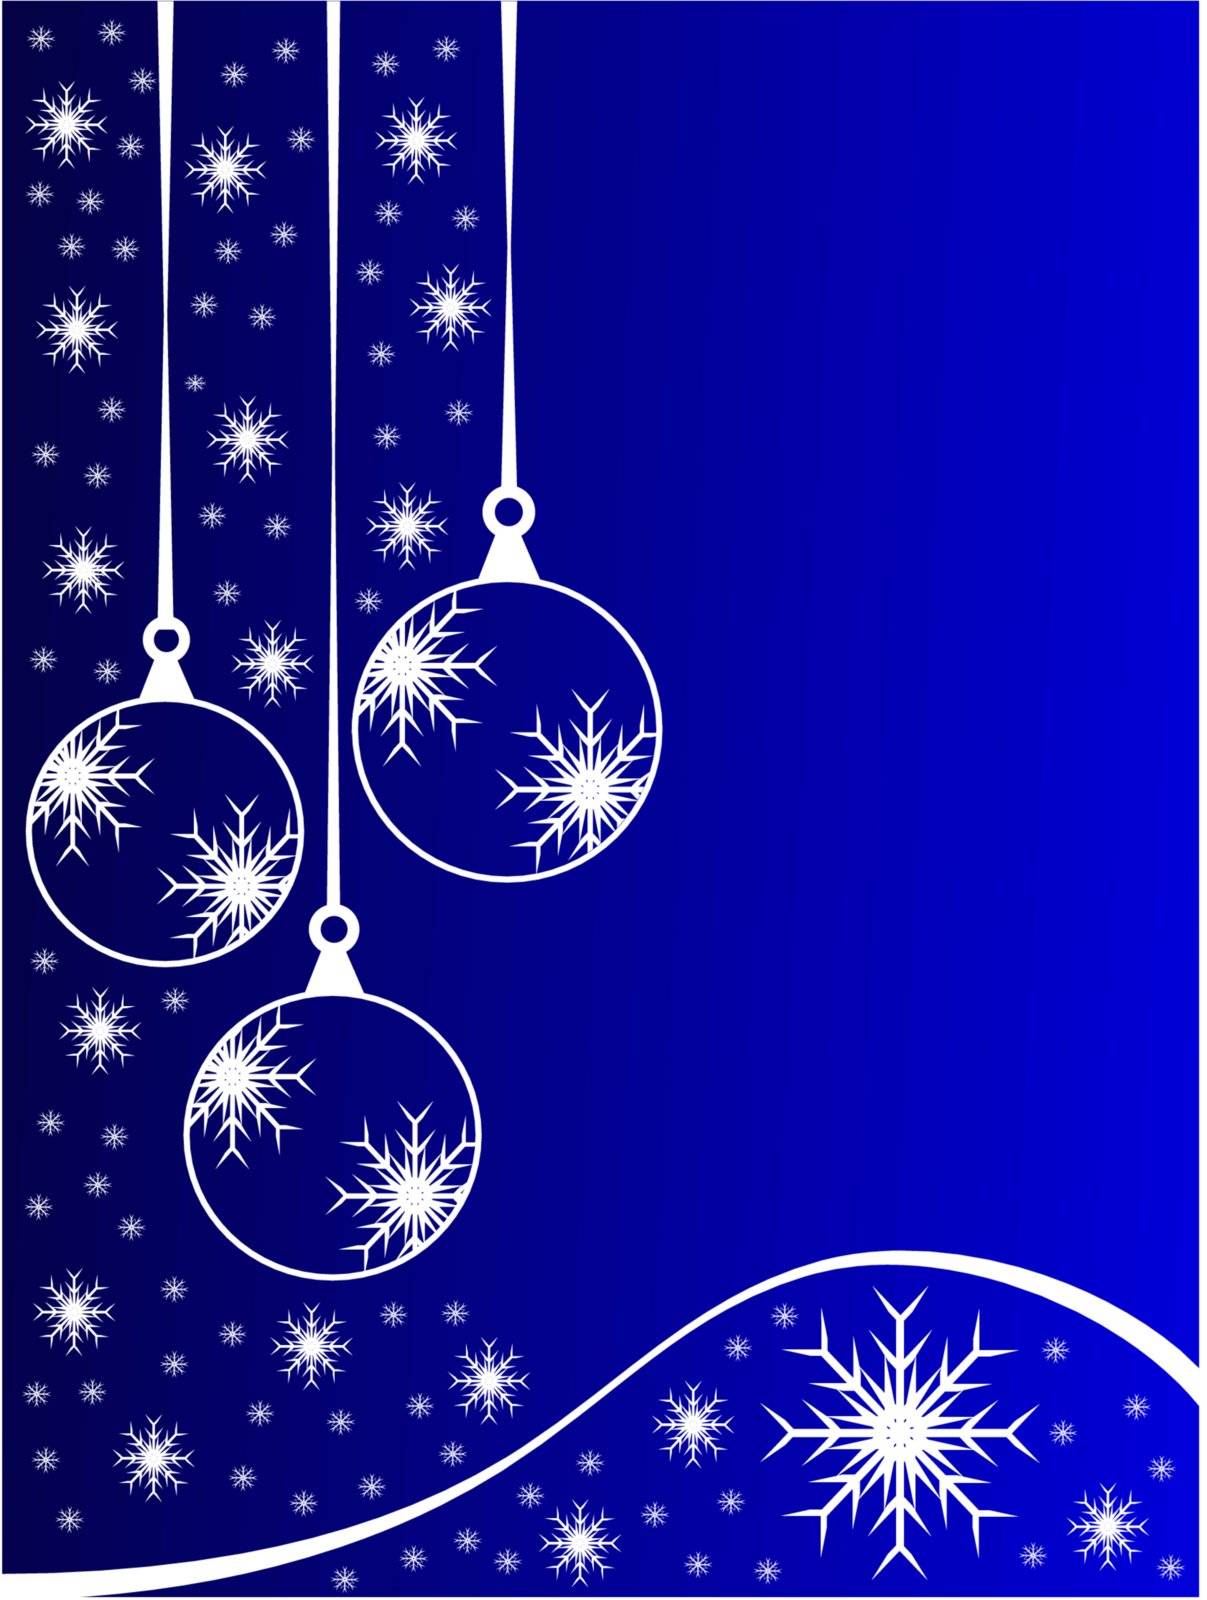 Blue Christmas Baubles Background by mhprice